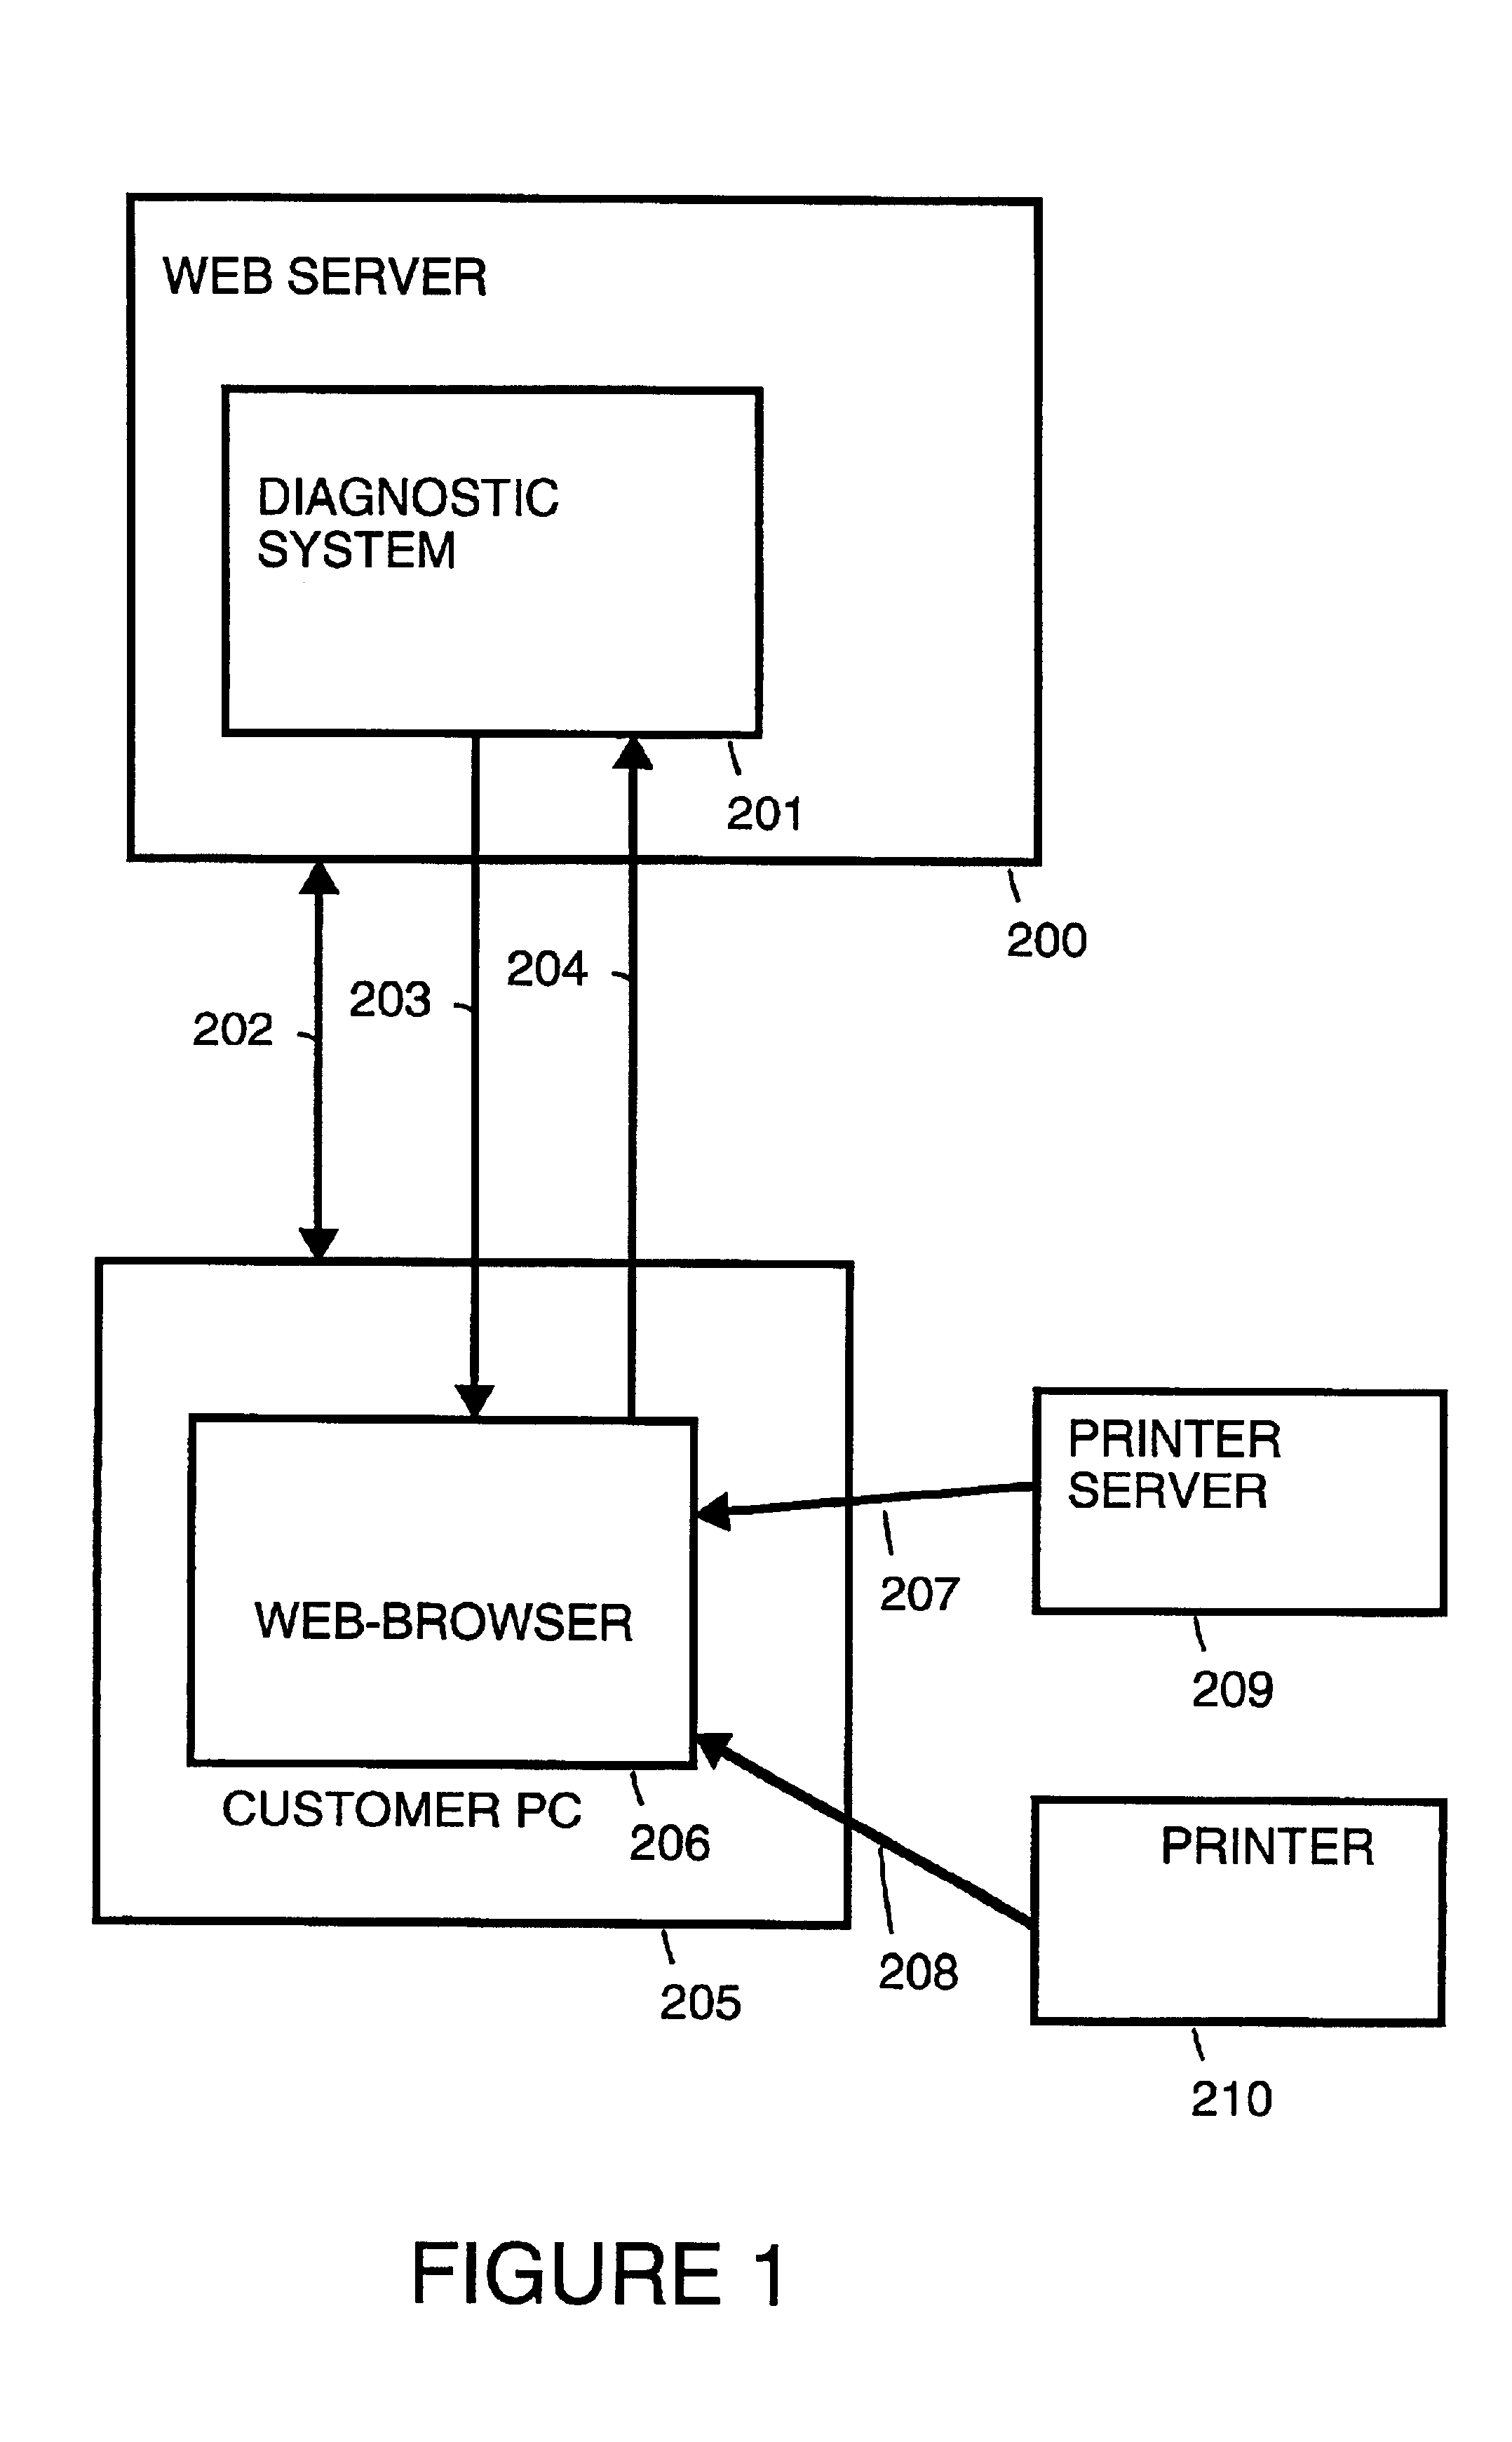 Model selection for decision support systems